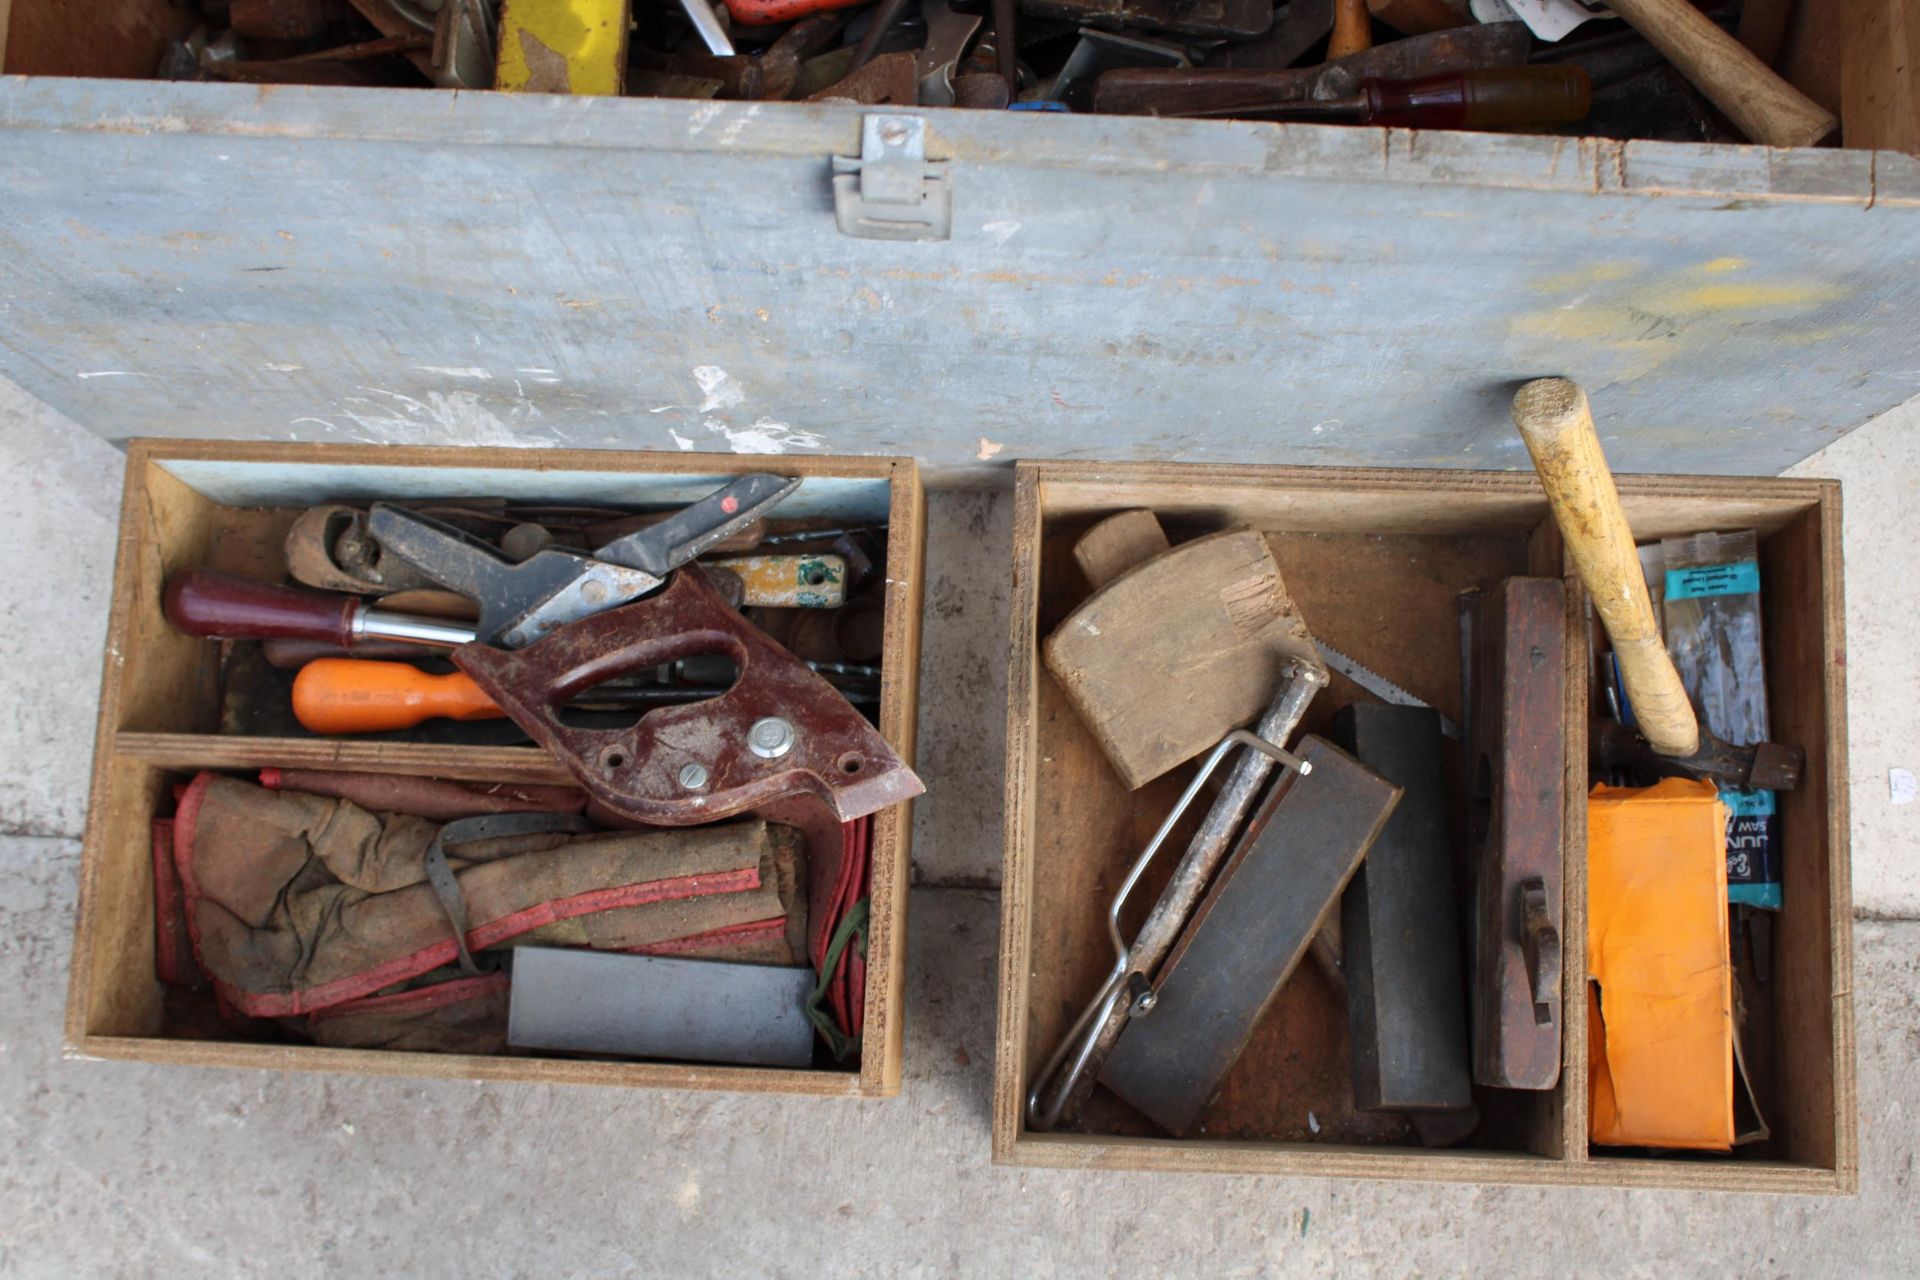 A LARGE WOODEN TOOL CHEST WITH A LARGE ASSORTMENT OF HAND TOOLS TO INCLUDE WOOD PLANES, CHISELS - Image 3 of 3